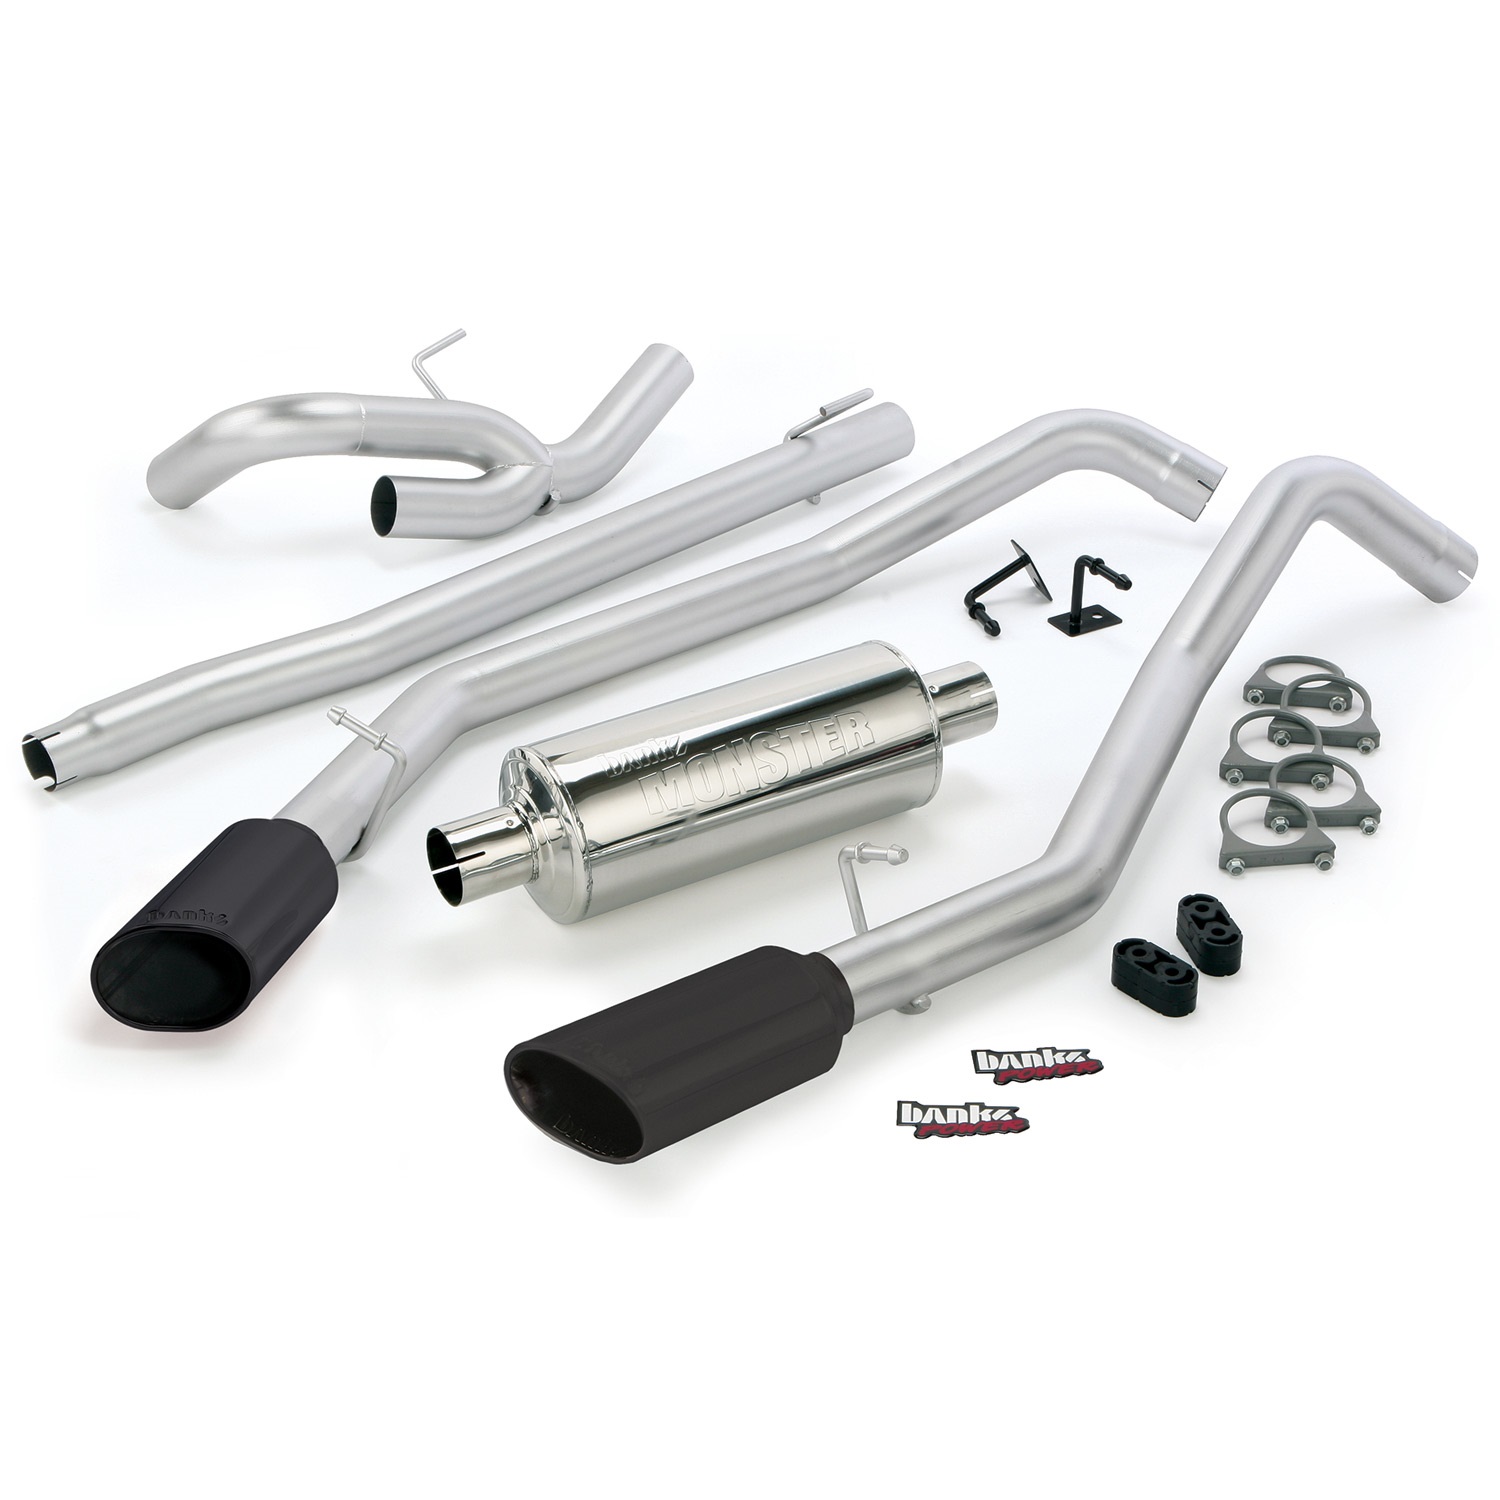 Banks Power 48748-B Dual Monster Exhaust System for 09-10 Ford - Click Image to Close